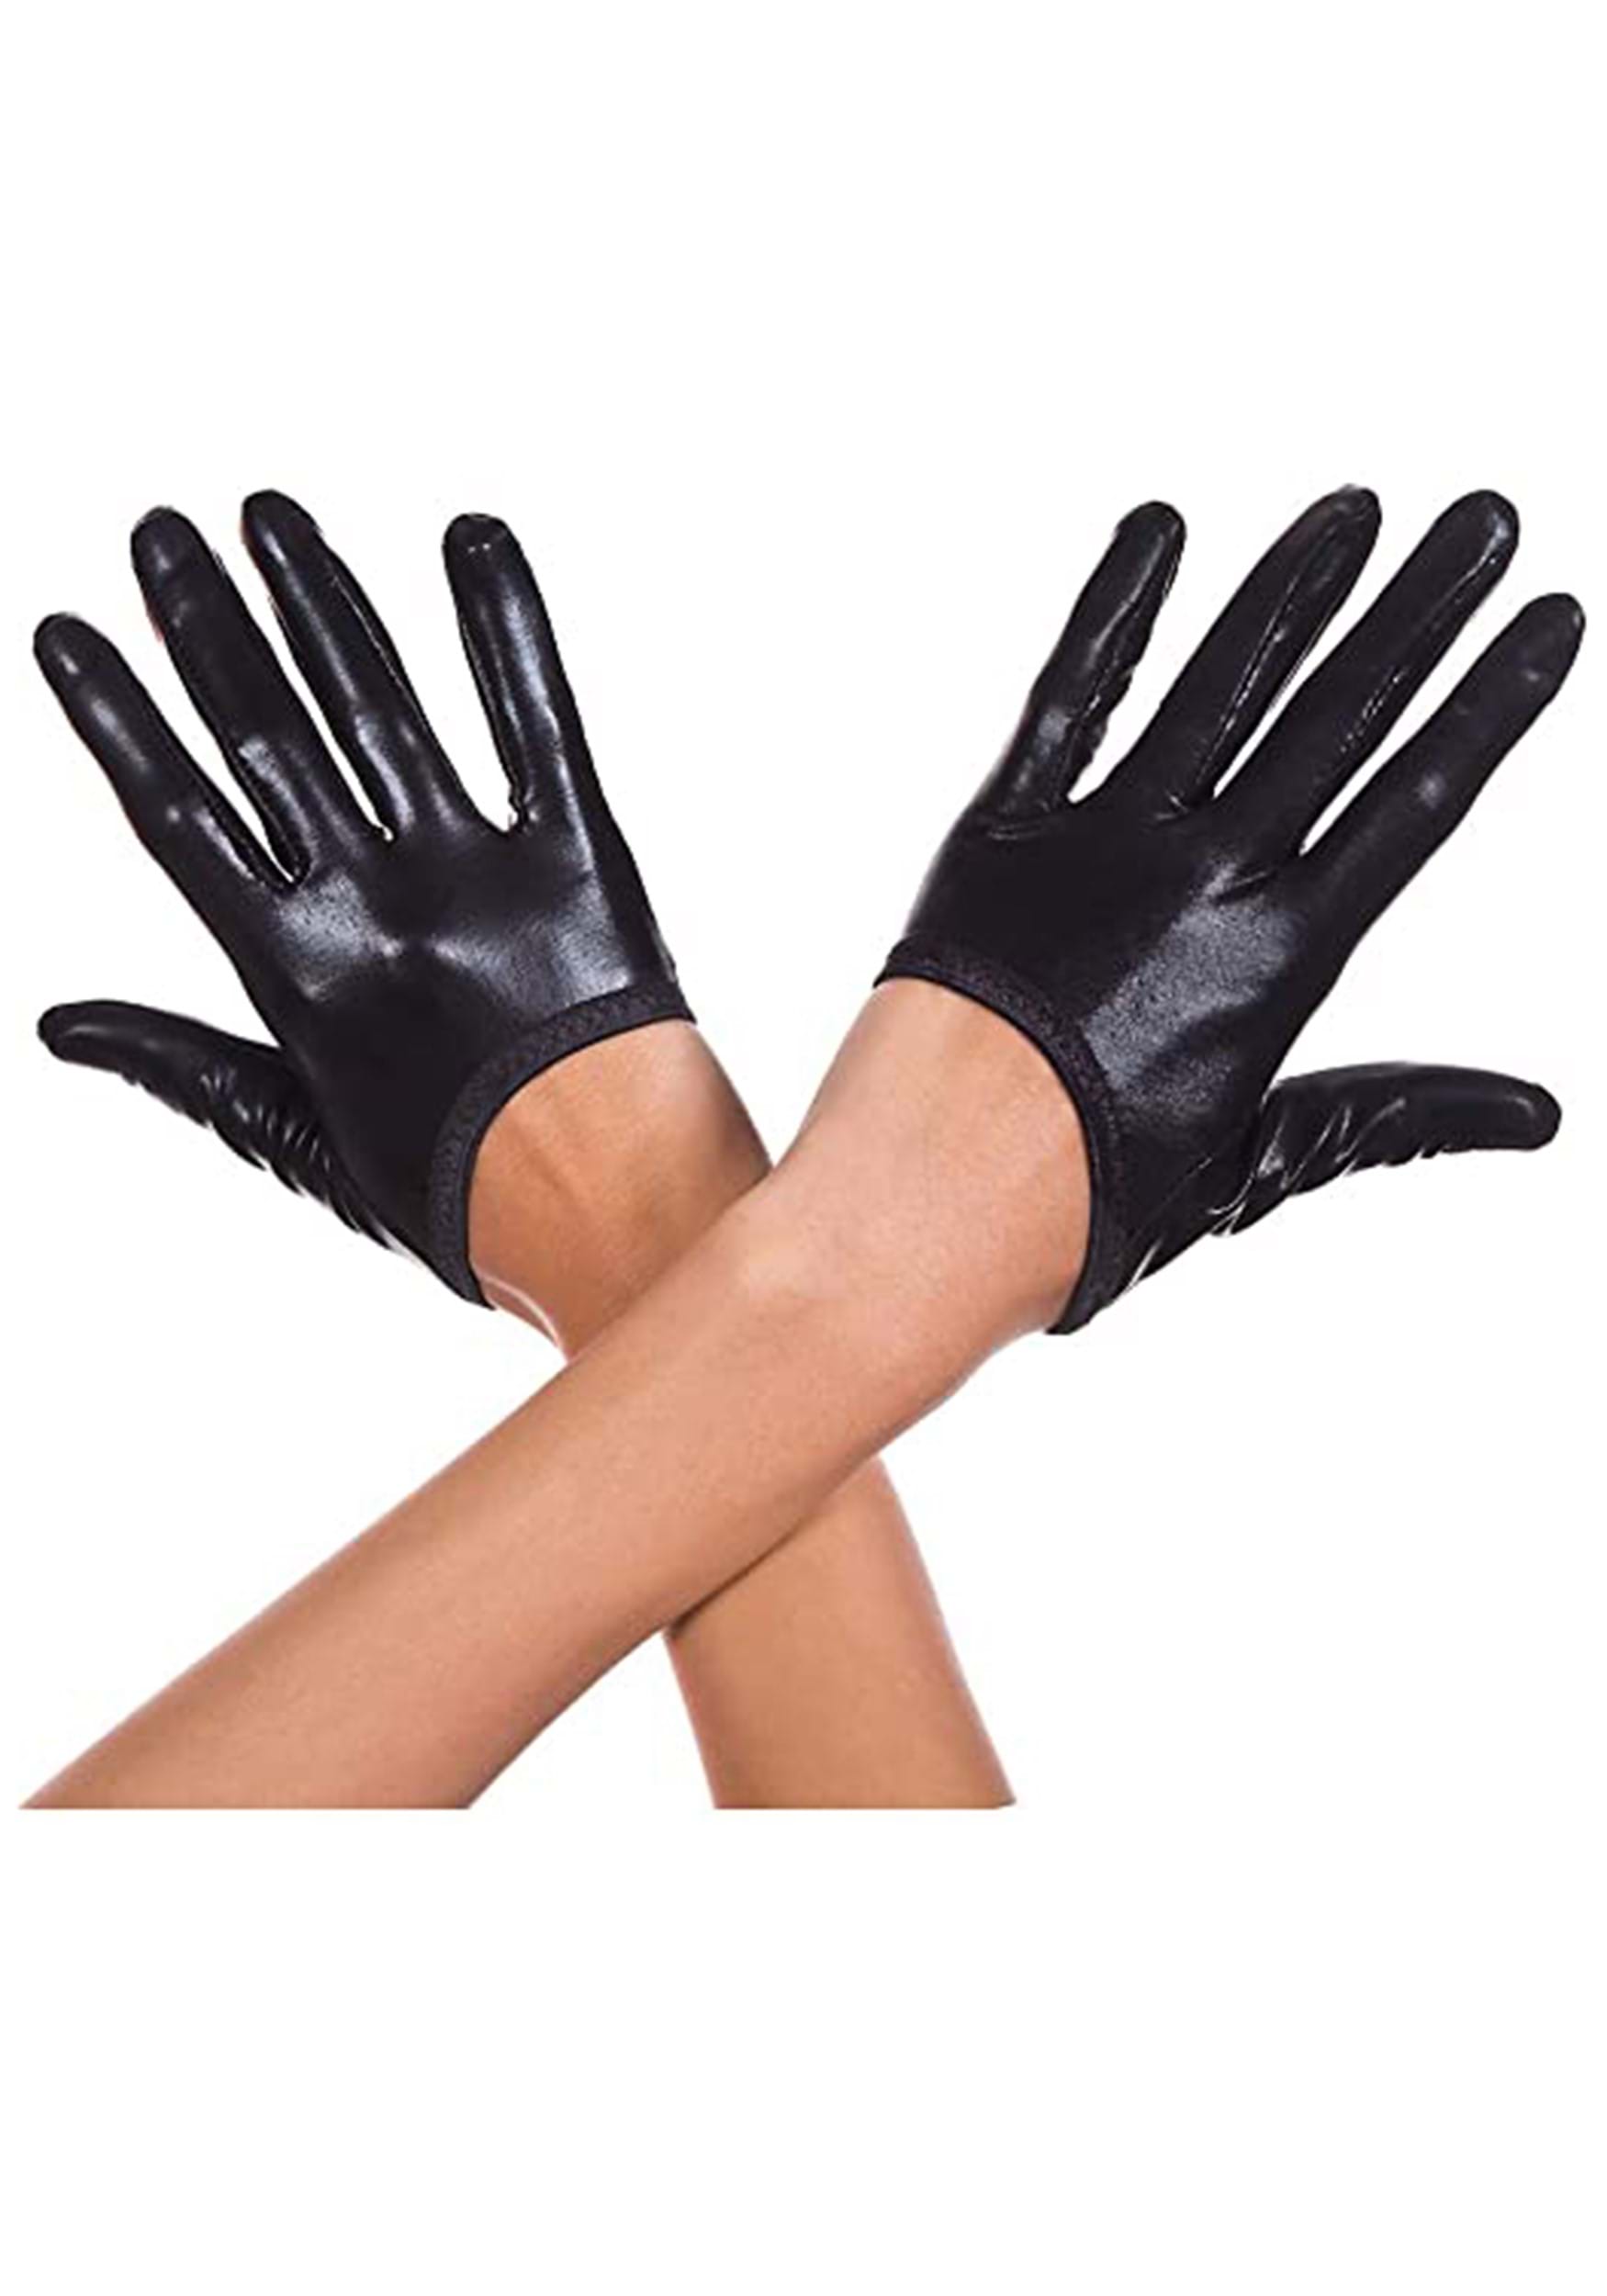 Black Cropped Gloves Accessory , Fancy Dress Costume Gloves